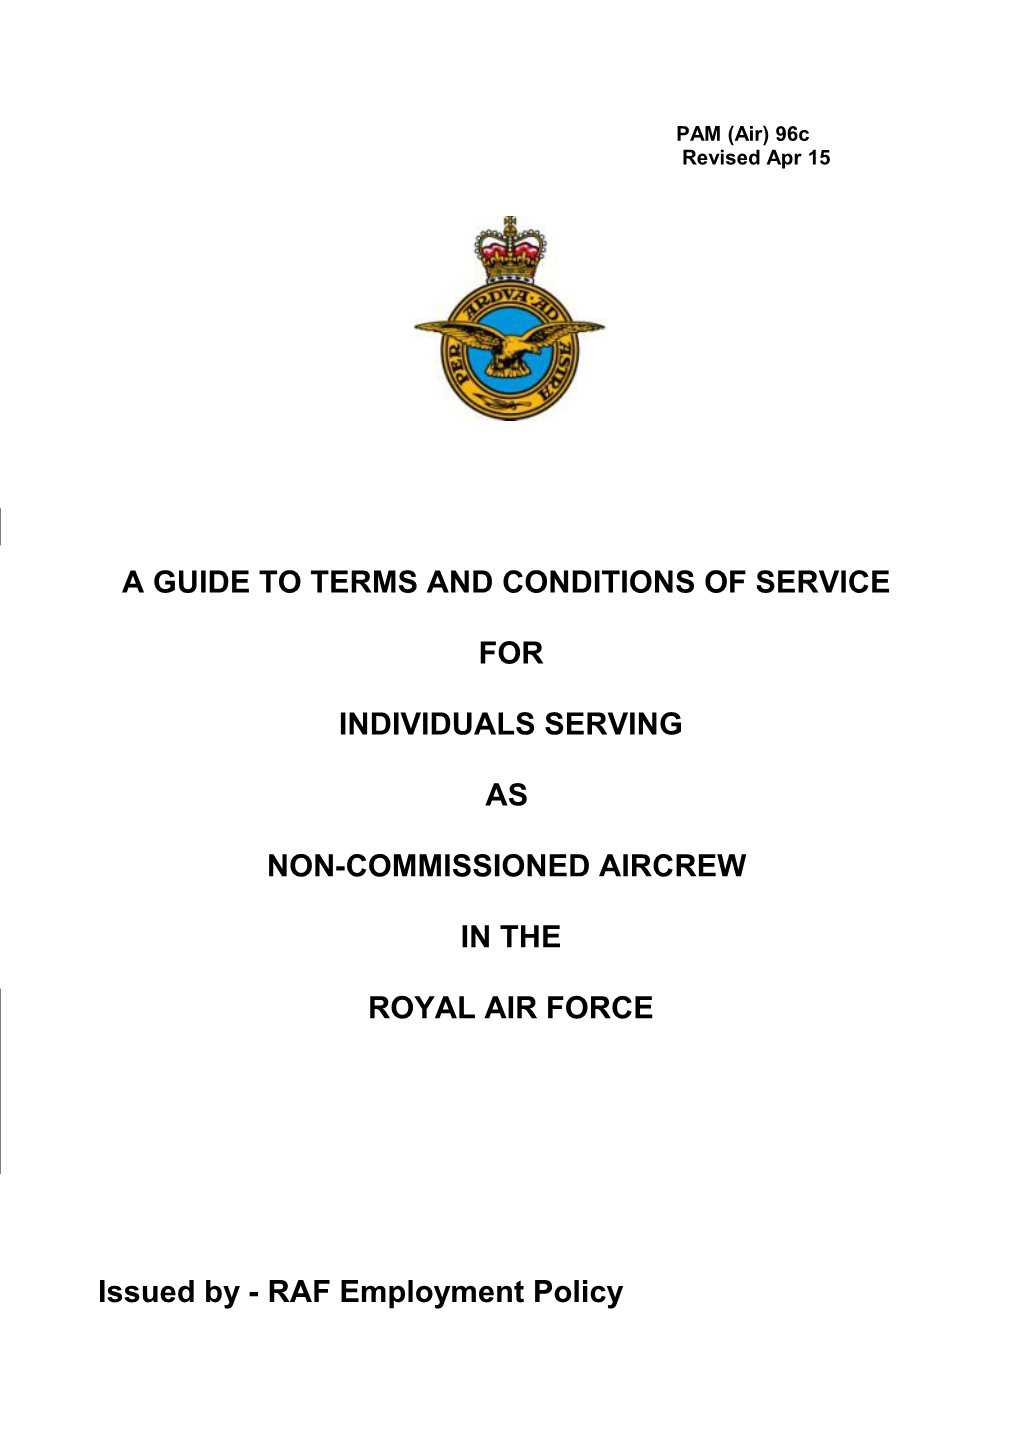 A Guide to Terms and Conditions of Service